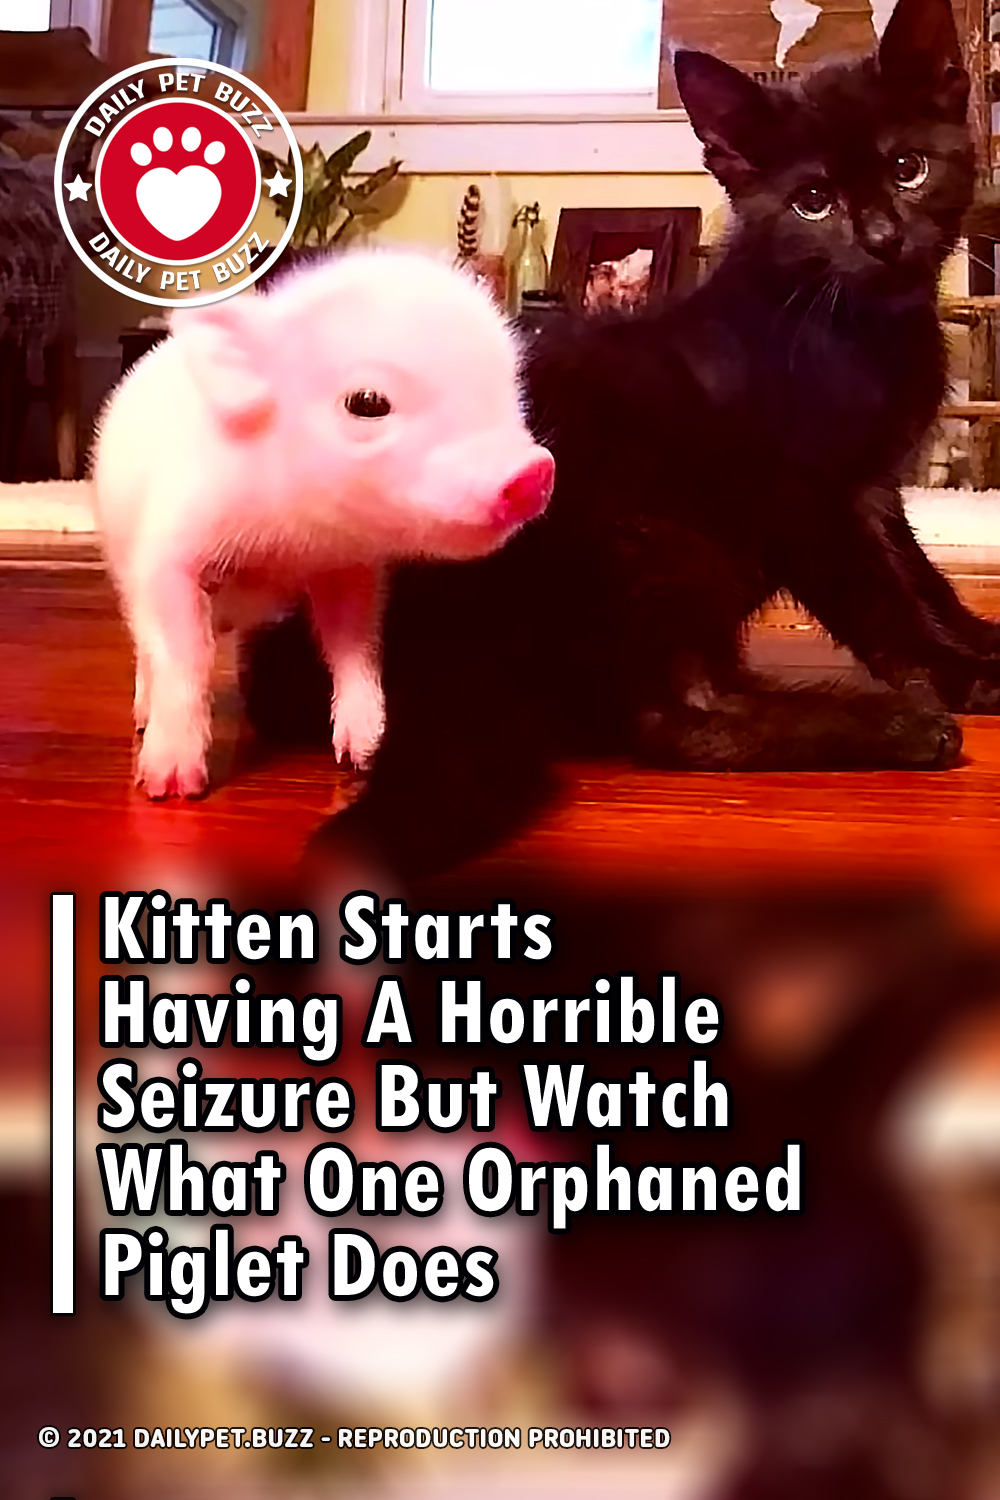 Kitten Starts Having A Horrible Seizure But Watch What One Orphaned Piglet Does